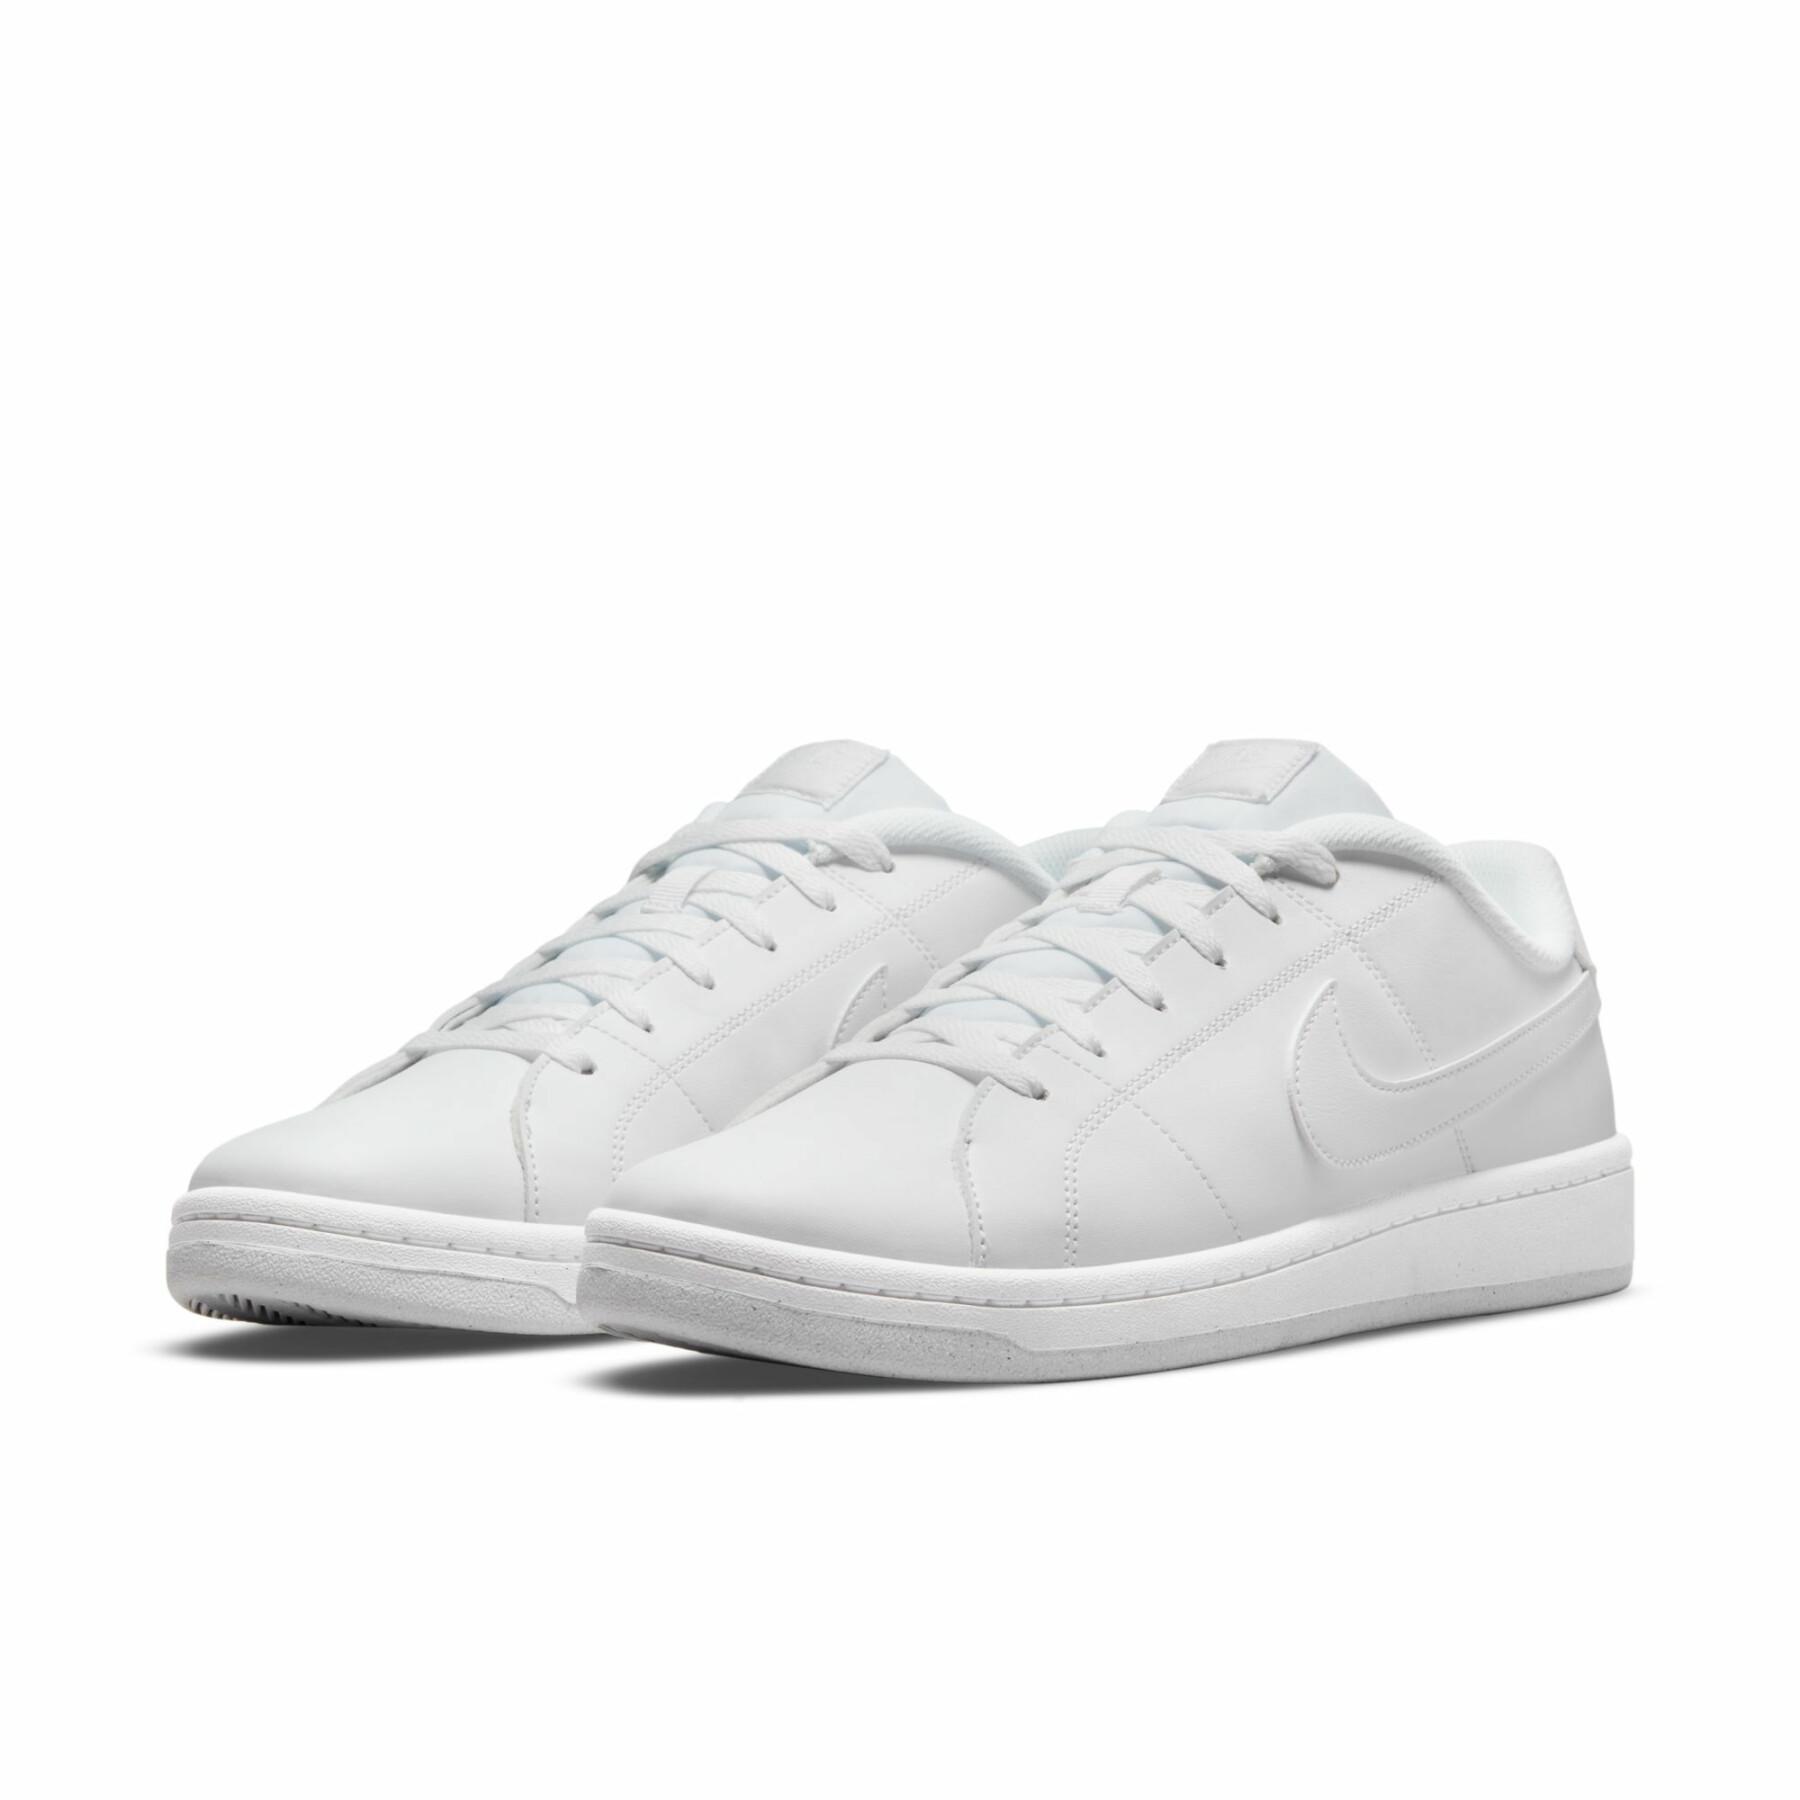 Painstaking Colleague Endless Sneakers Nike Court Royale 2 Next Nature - Nike - Men's Sneakers - Lifestyle